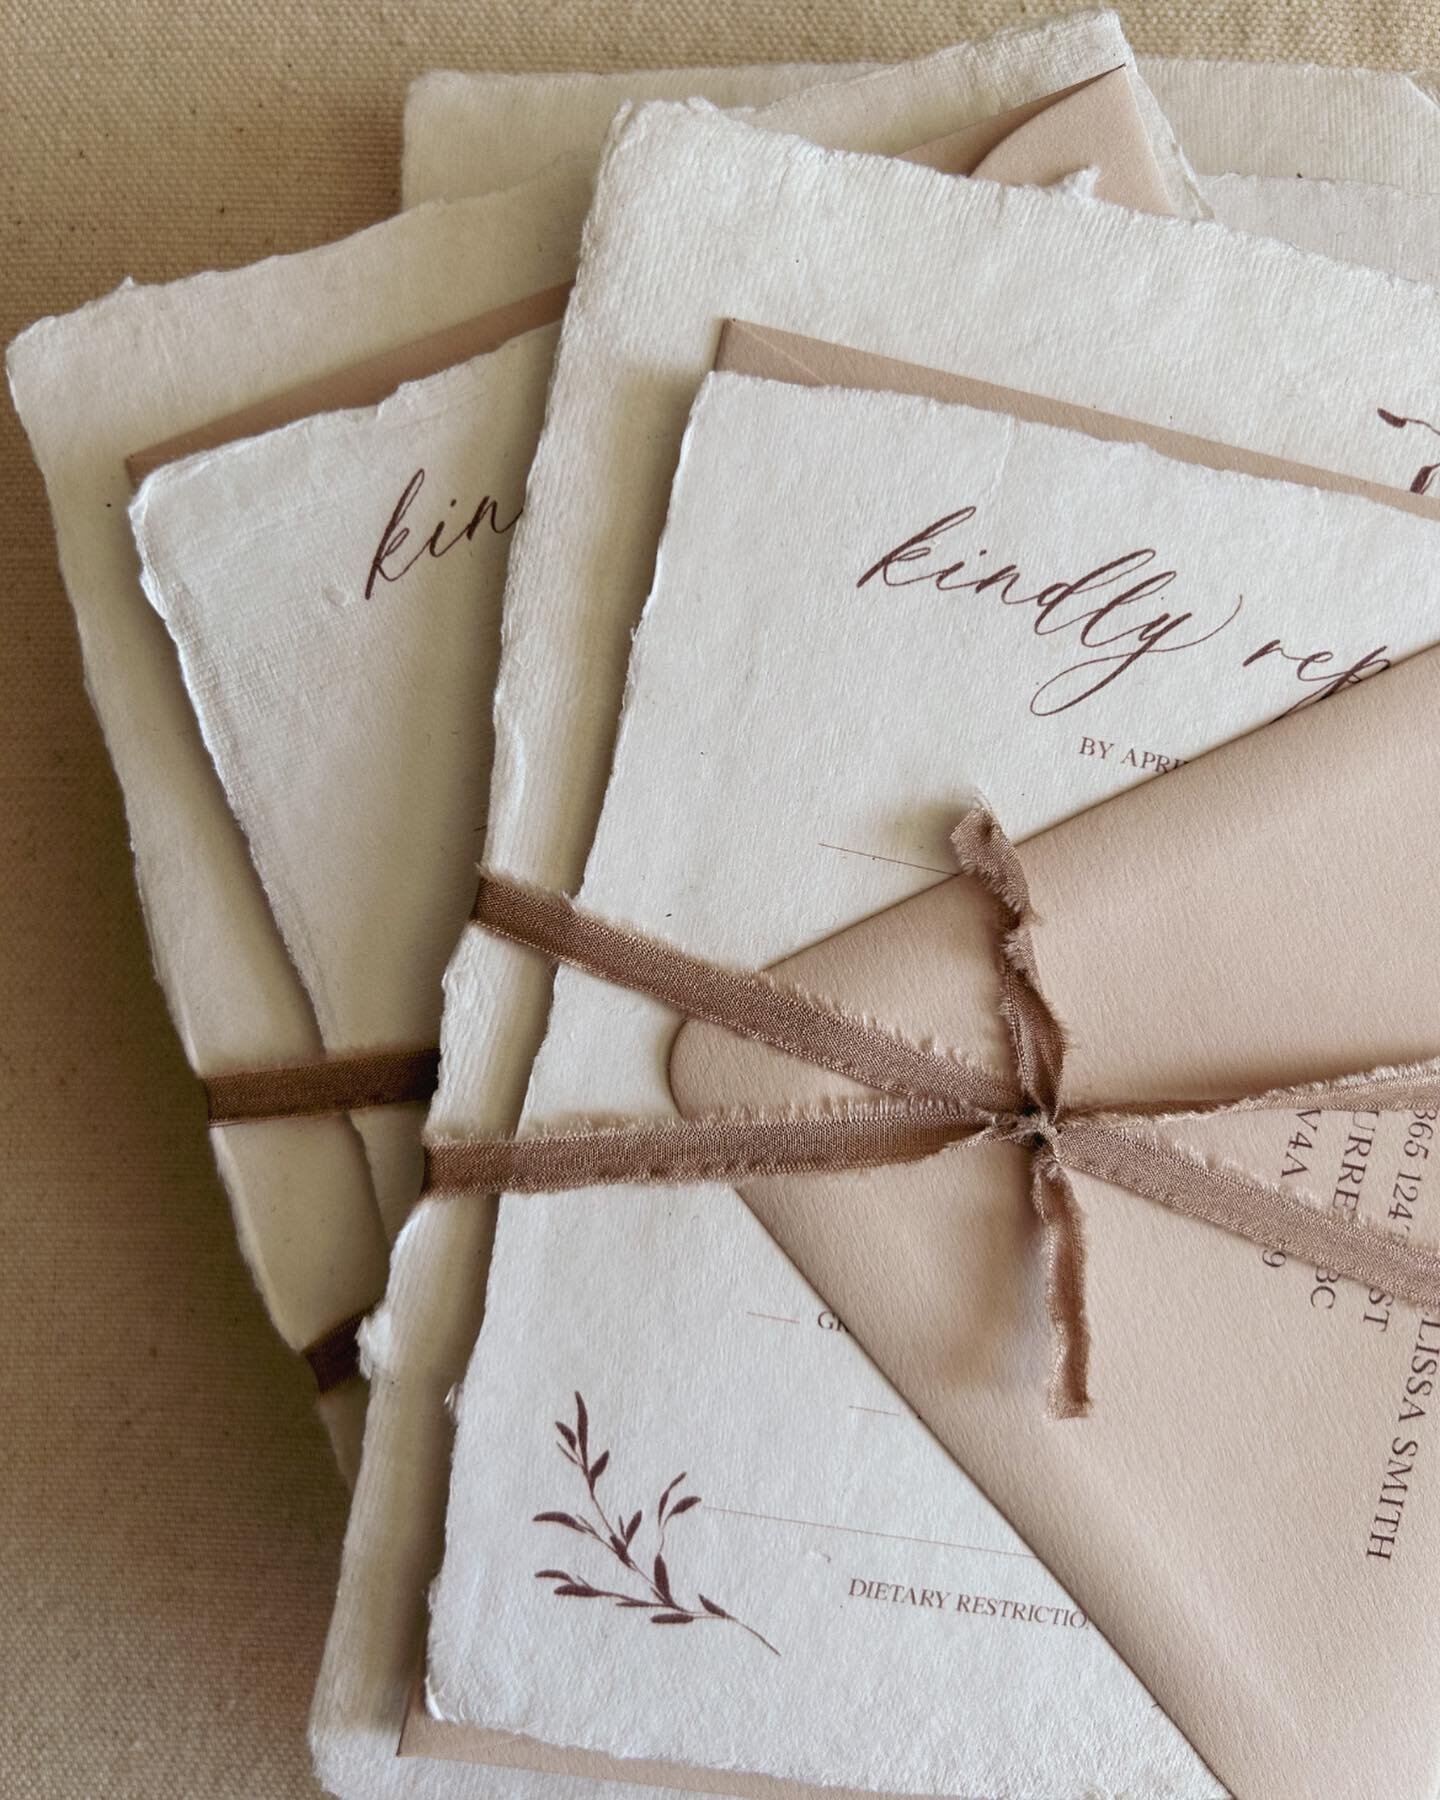 All the neutral tones for this dreamy custom invitation suite 🤎
.
.
.
.
#weddinginvitations #weddingstationery #stationerylove #stationerydesign #yycweddings #calgaryweddings #flatlayoftheday #paperlove #styling #flatlaystyling #weddingpaper #finear